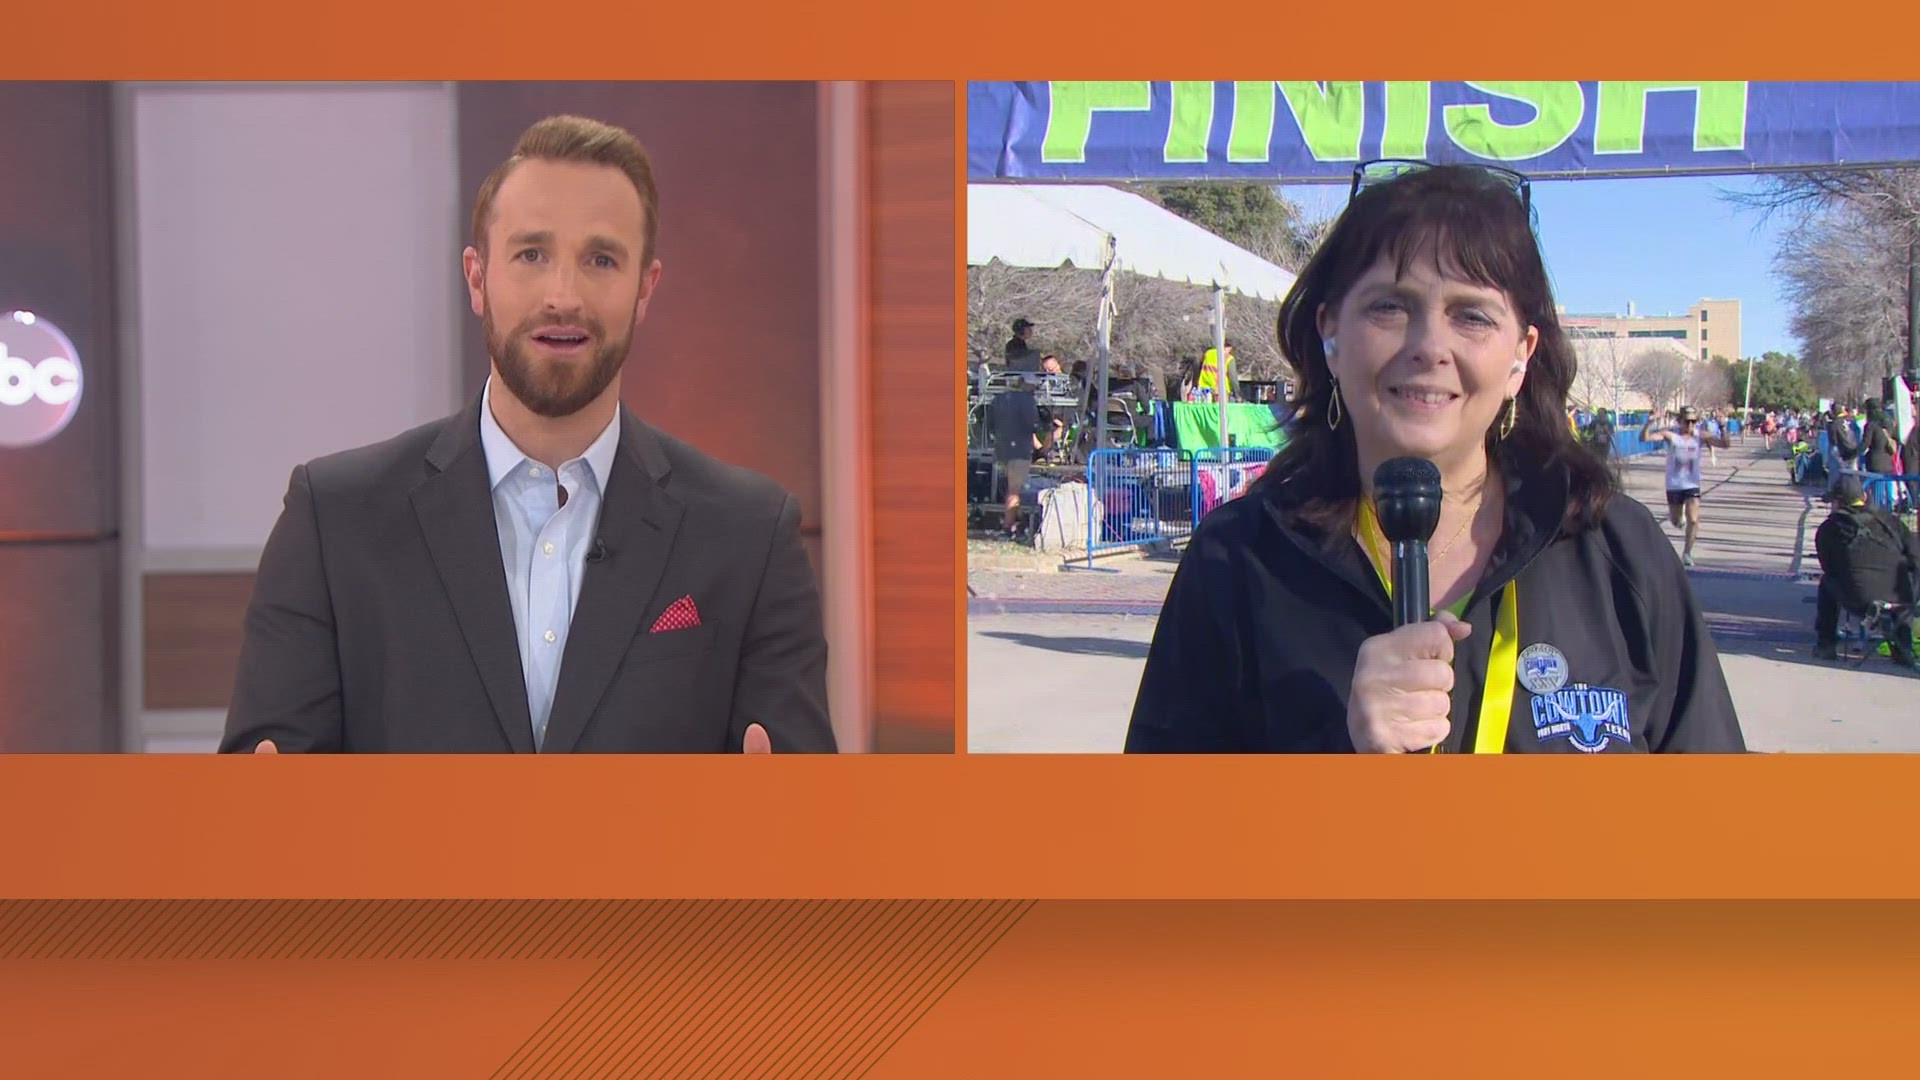 Heidi Schwartz joined WFAA live from the Cowtown Marathon in Fort Worth to share how the event makes an impact on Fort Worth.